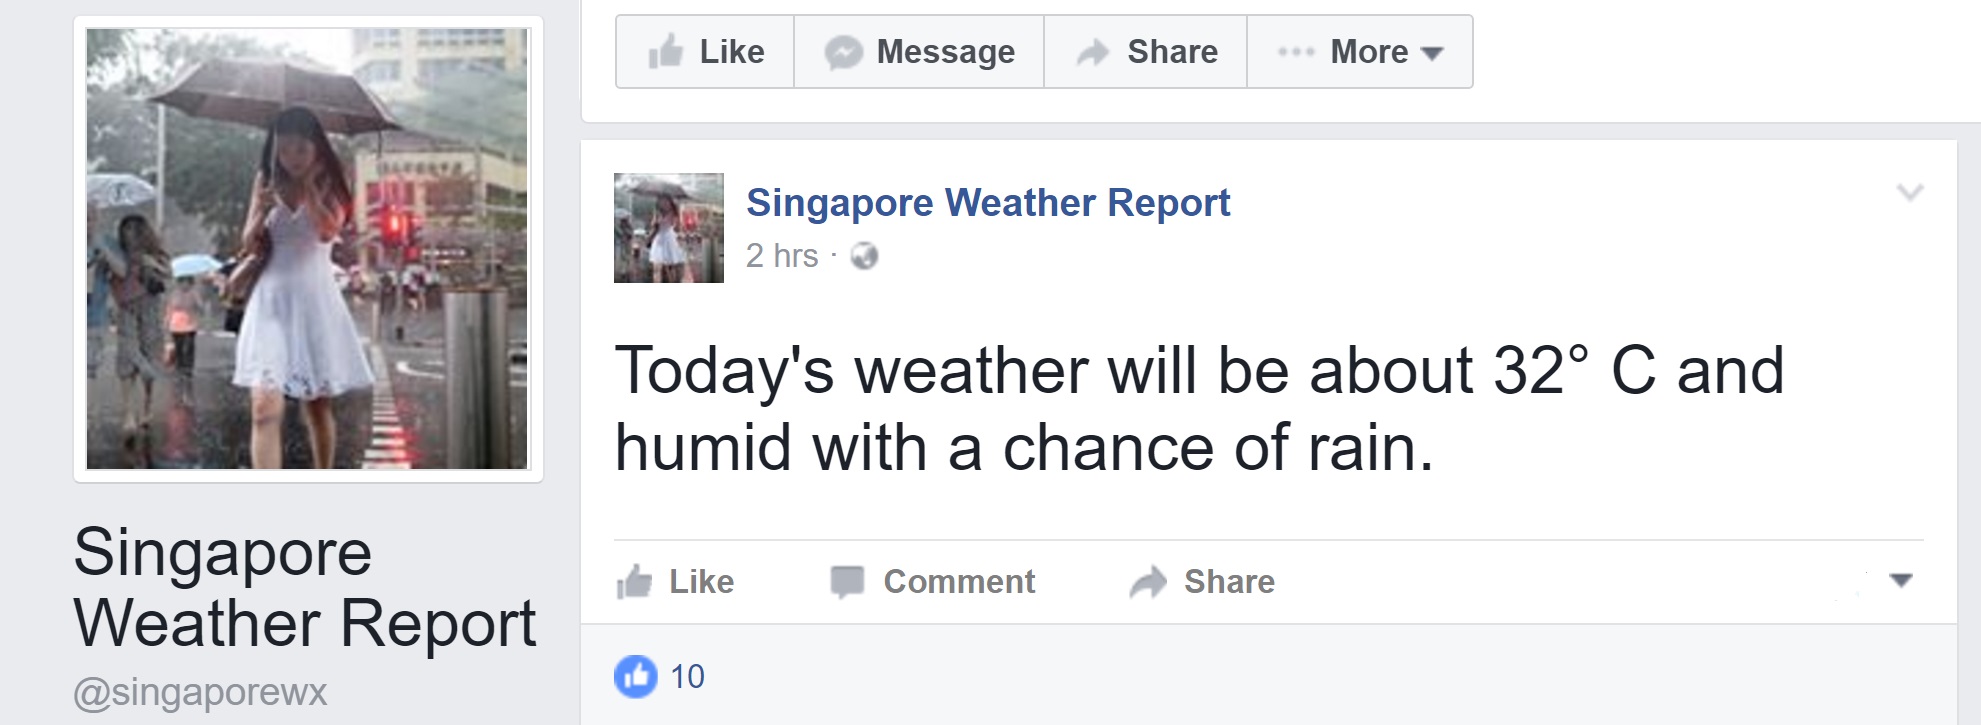 Source: Singapore Weather Report Facebook page.